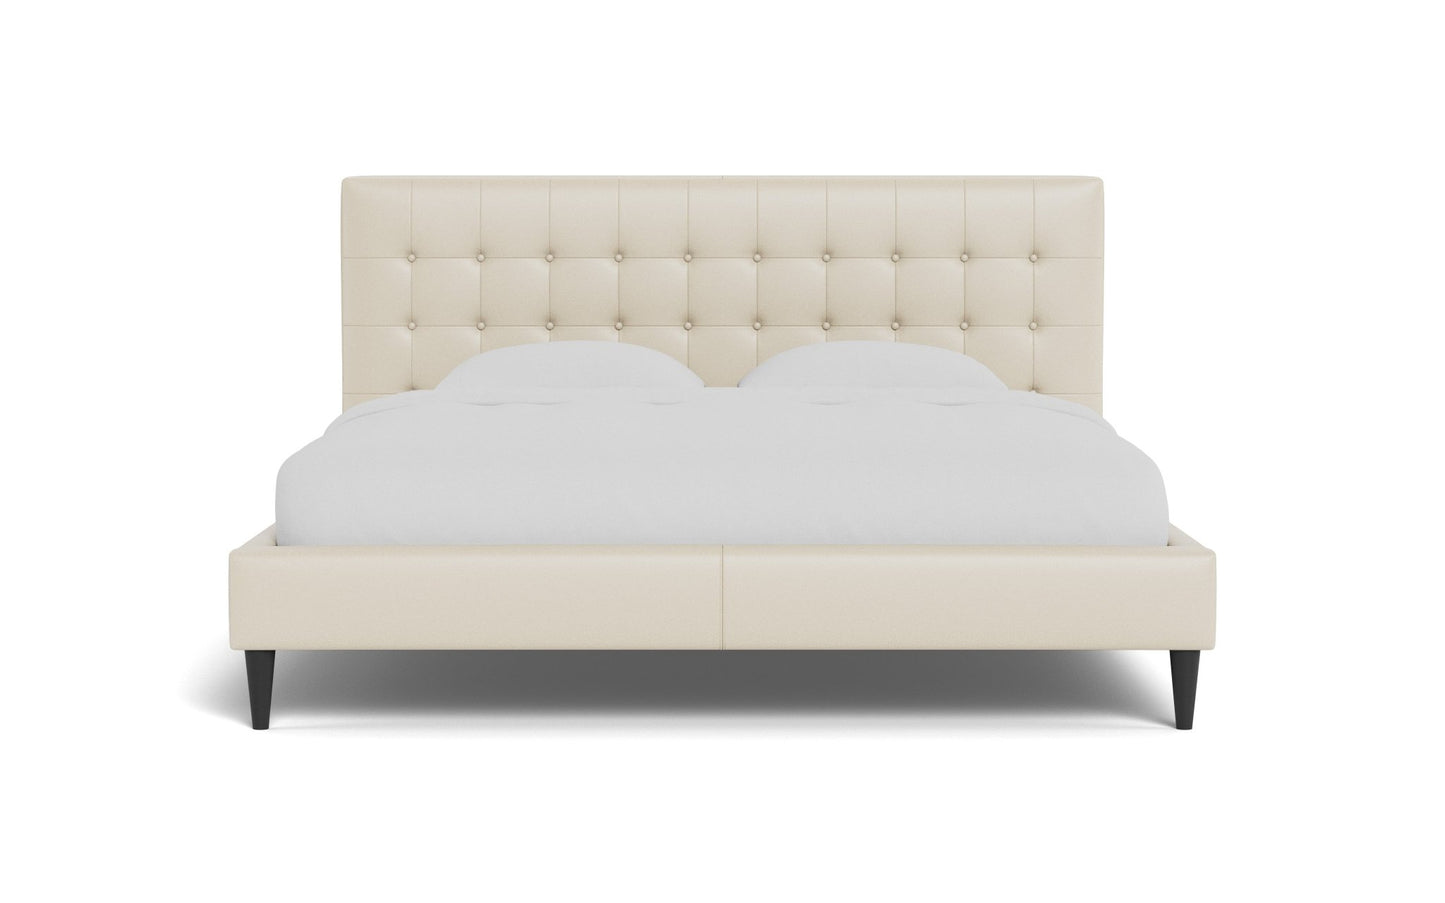 Wallace King Tufted Leather Bed